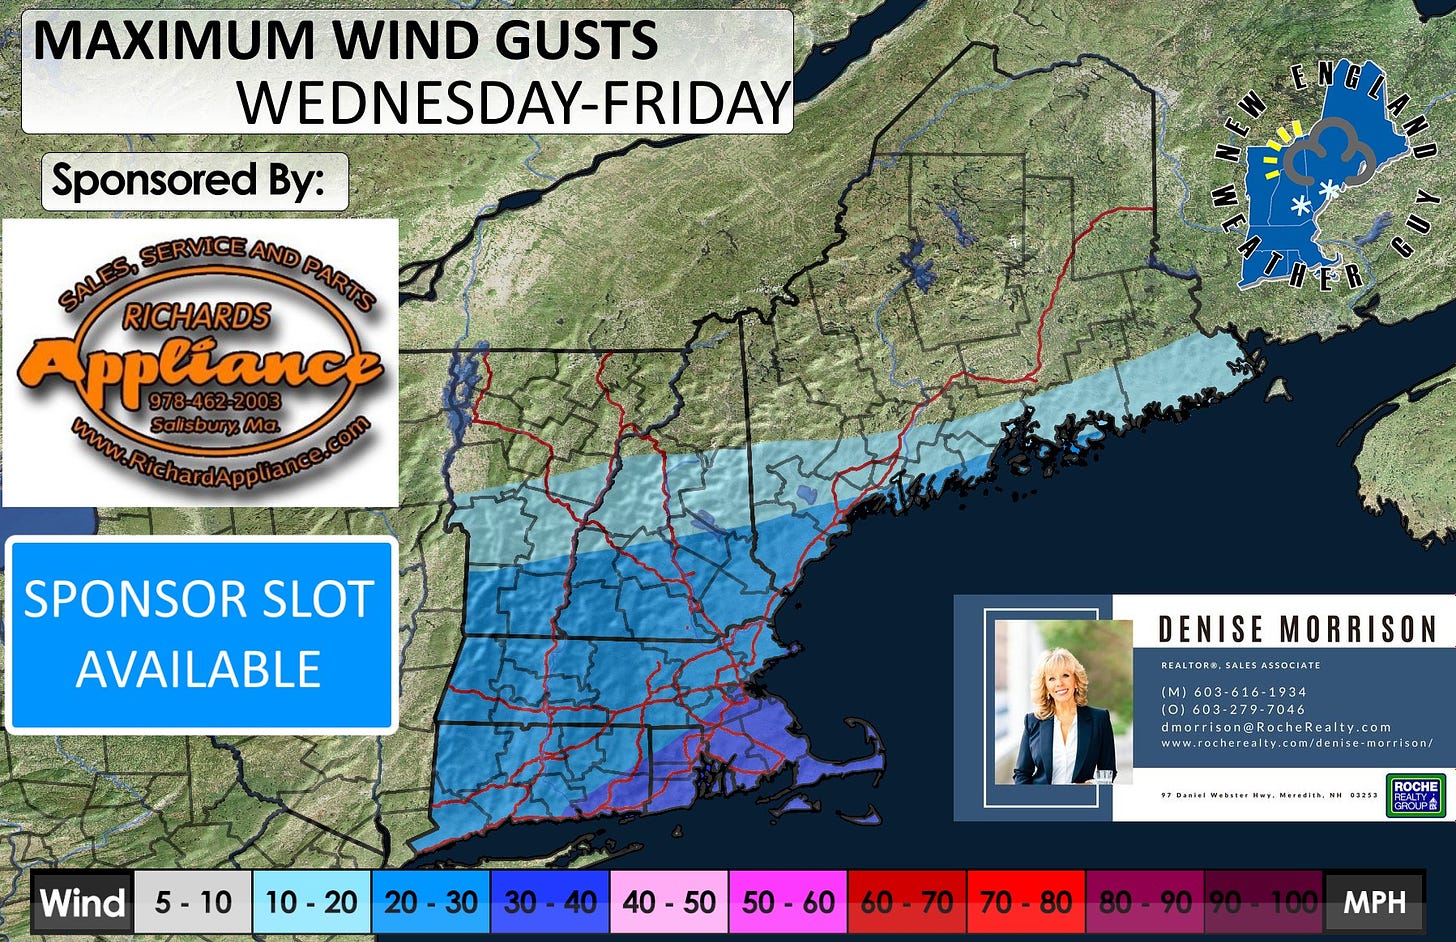 May be an image of 1 person, map and text that says 'MAXIMUM WIND GUSTS WEDNESDAY-FRIDAY FRIDAY Sponsored By: RICHARDS Appliance WAAA SPONSOR SLOT AVAILABLE Wind DENISE NISEMORRISON MORRISON REALTORE. IMI6D3-616-1934 SALES SALESASSOCIATE 101603-279-7046 dmorrisan@RocheRealty.com umormsangRochekealty.cor murrisun 5-10 10-20 20 10 20 30 Wabster 30 30-40 40 40-50 50 50-60 40 50 Maraaion, 02253 ROCHE ROP食 60-70 70 60- 70-80 70 80 80-90 MPH'